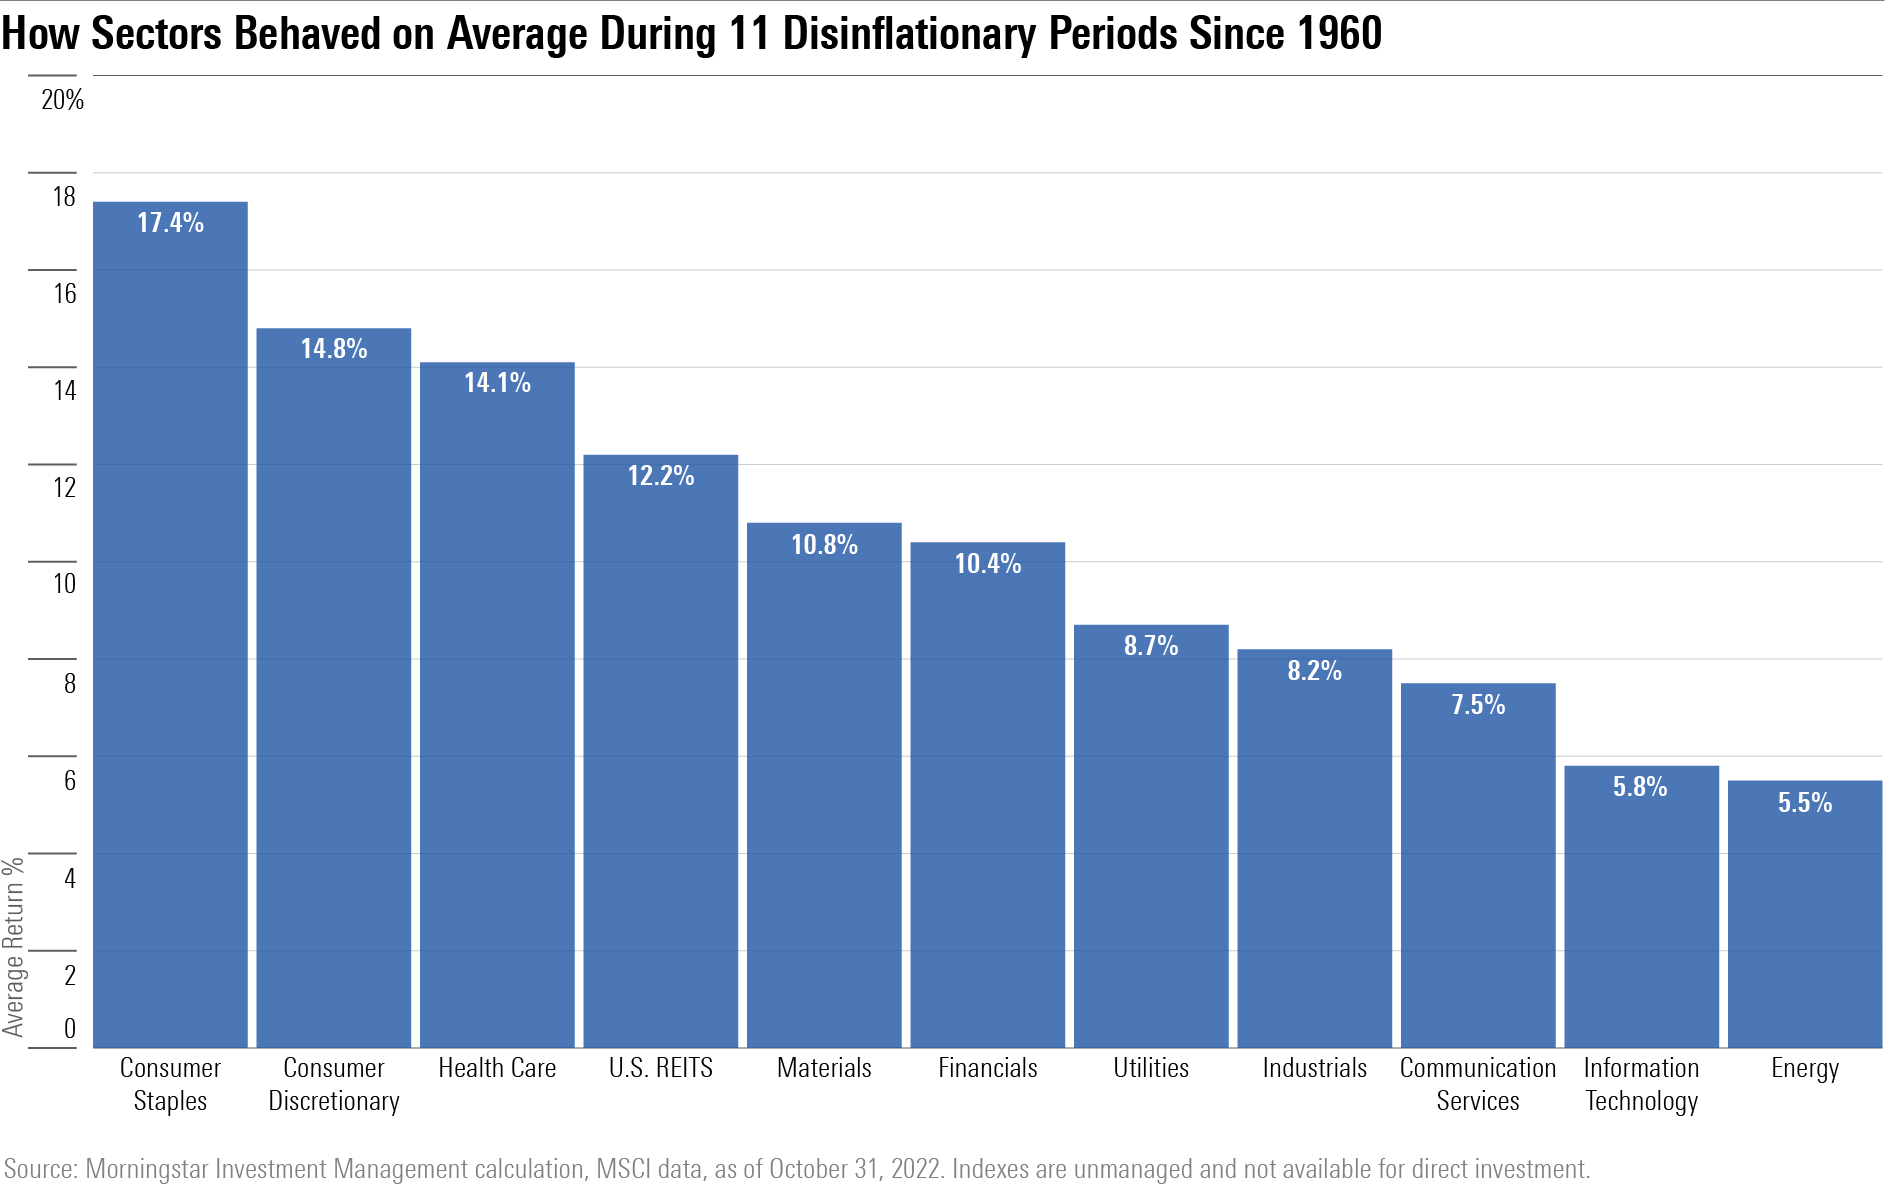 Bar chart showing the average returns of various sectors during 11 disinflationary periods since 1960. Consumer staples had the highest return, and energy had the lowest.